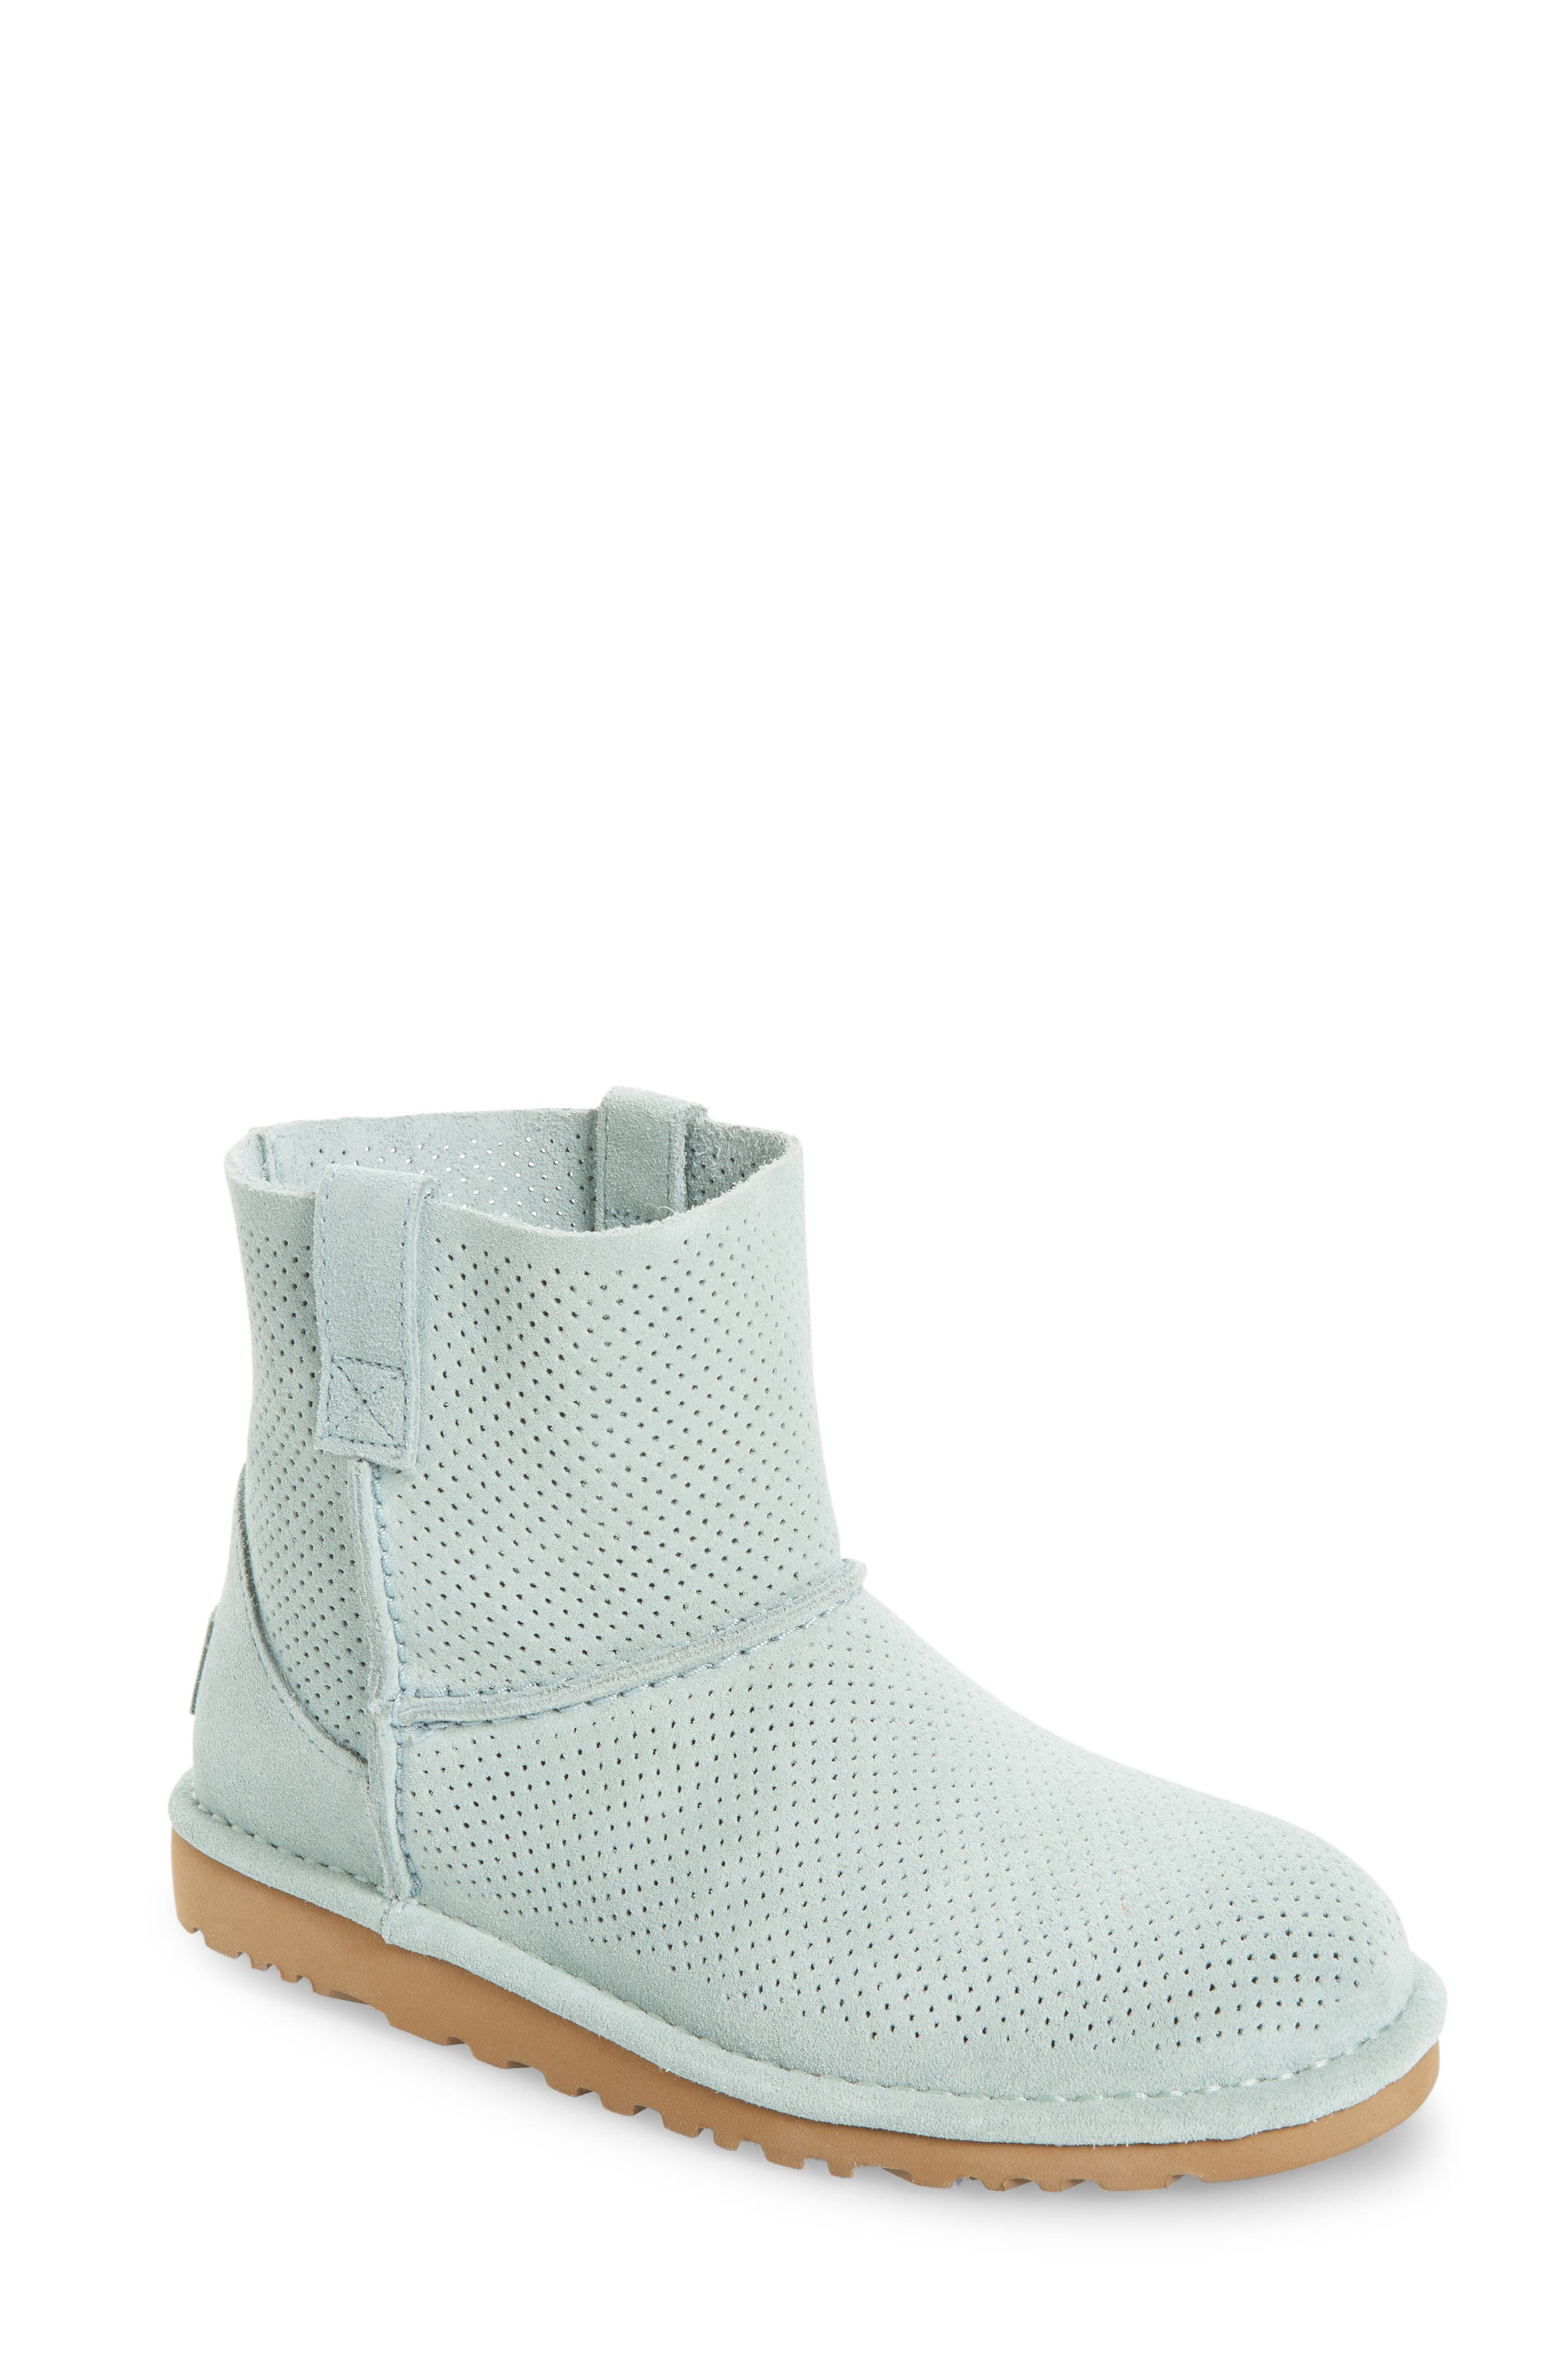 ugg unlined boot